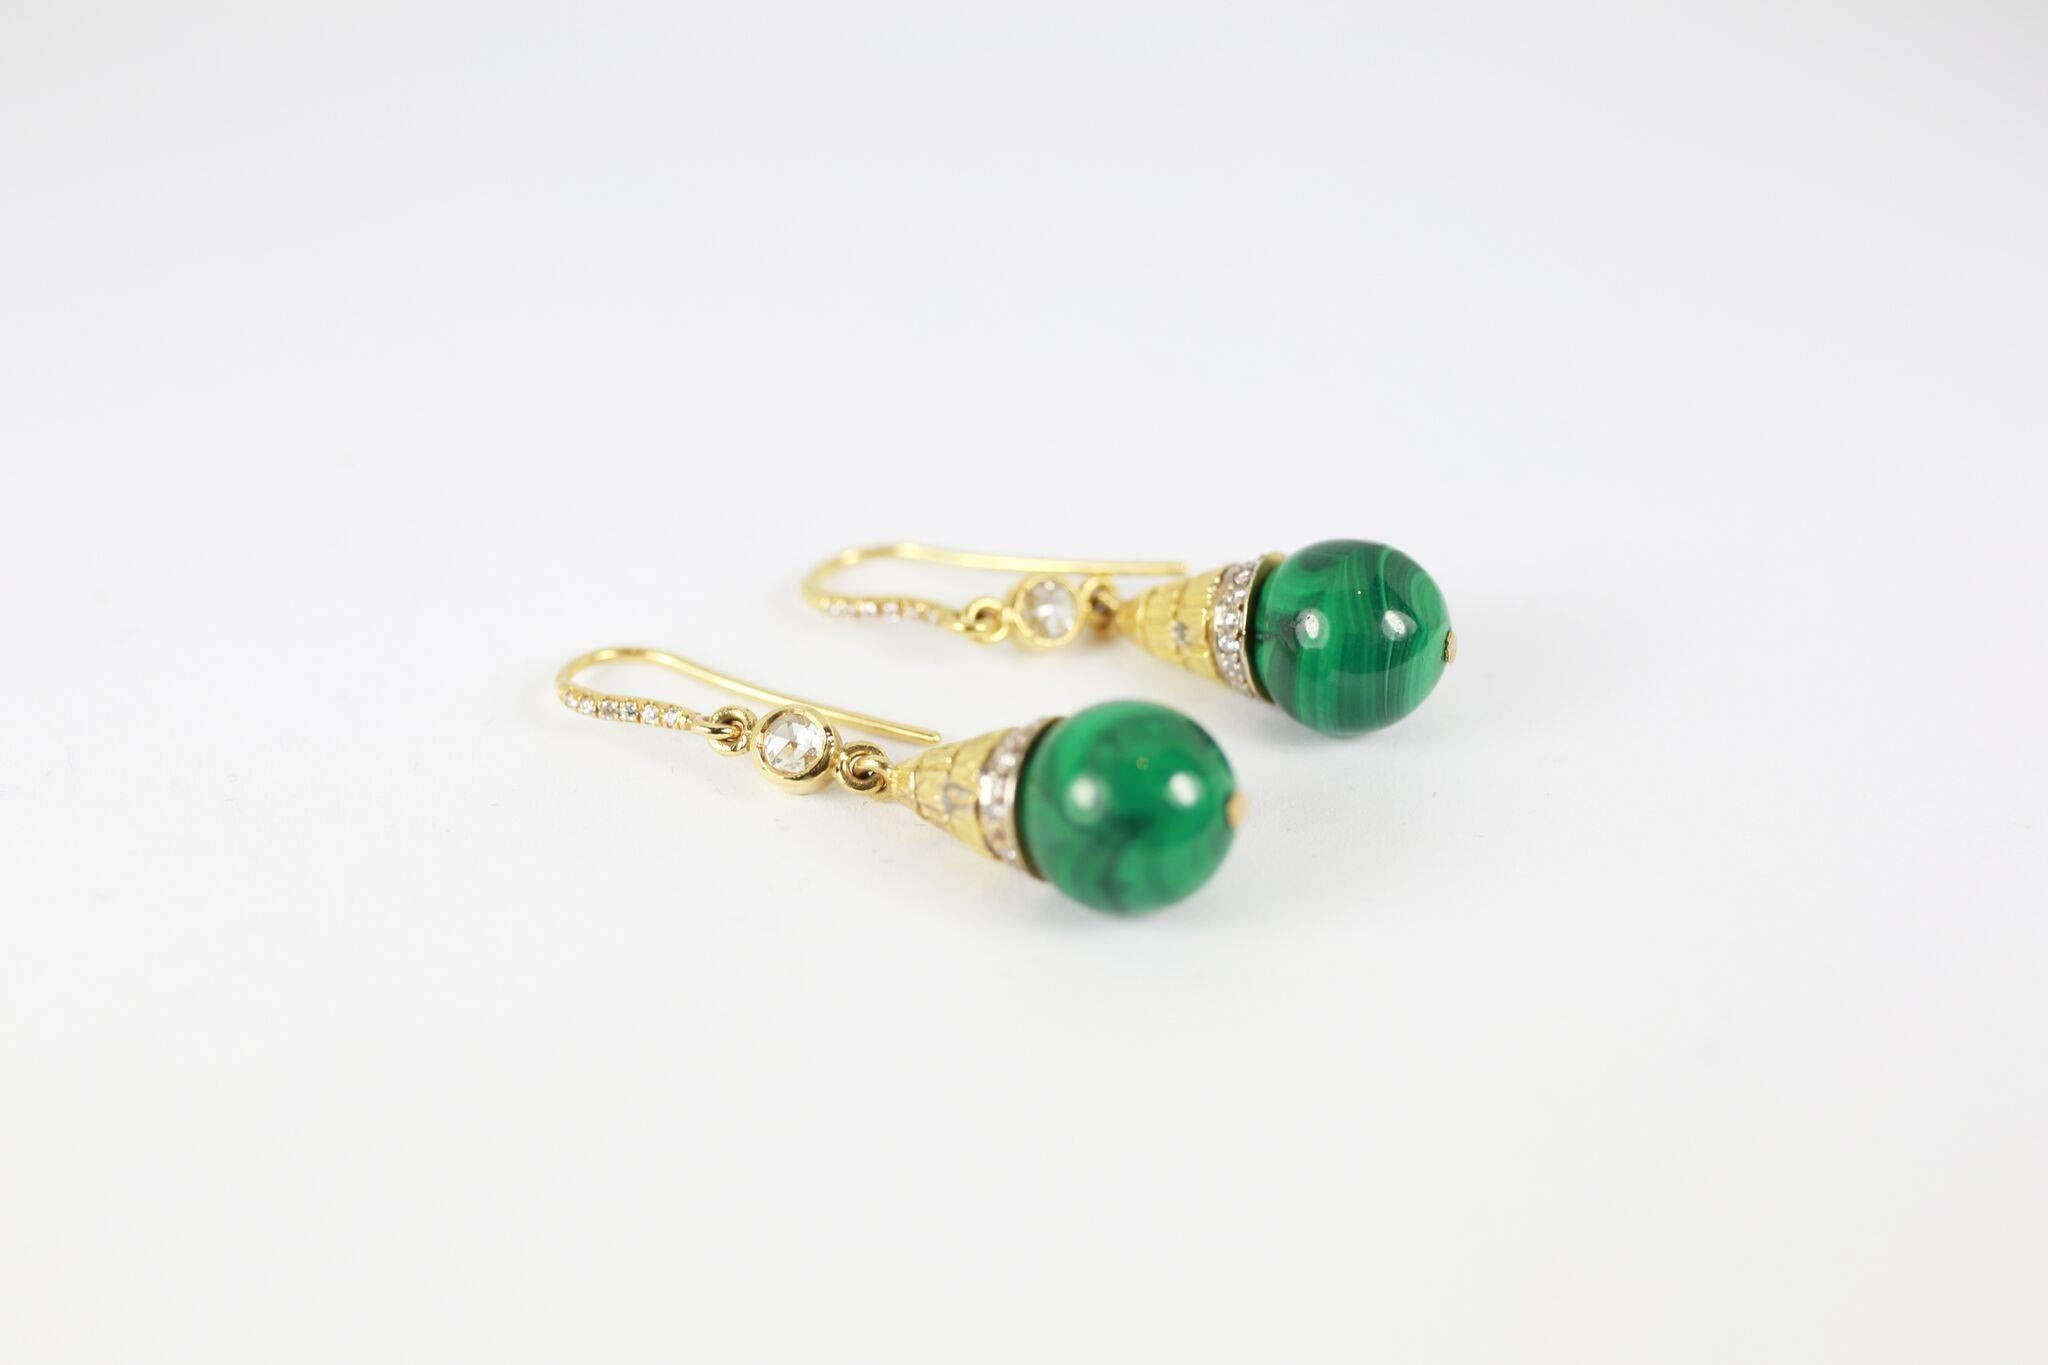 18K gold drop earrings inlaid with malachite and white diamonds.